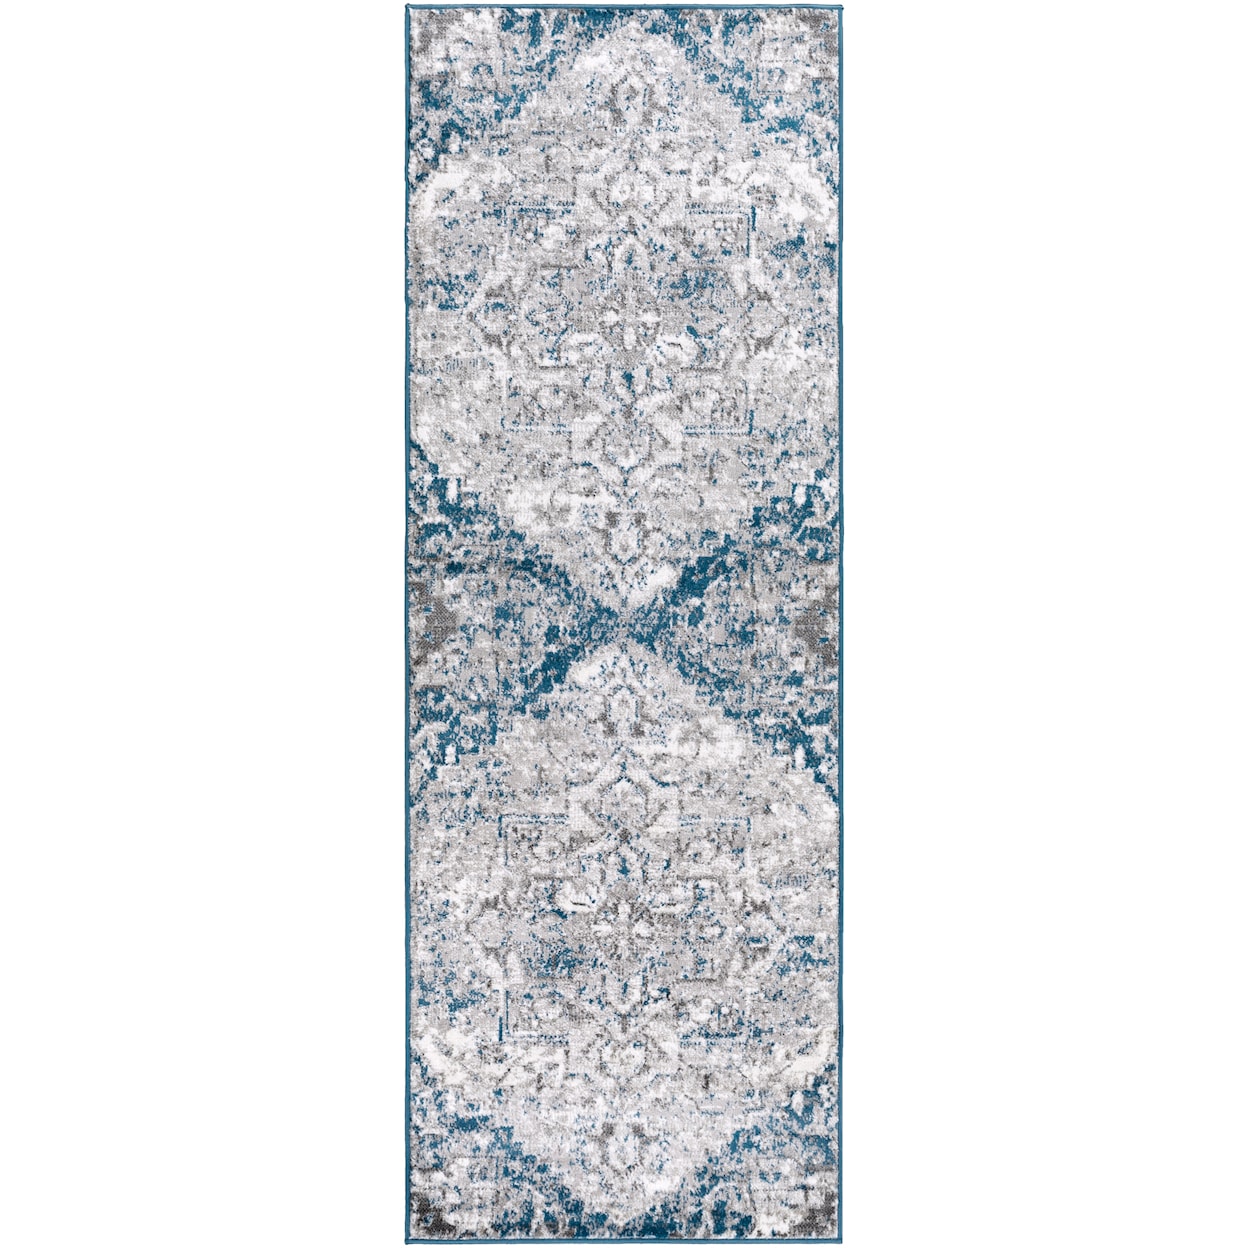 Ruby-Gordon Accents Monte Carlo Rugs